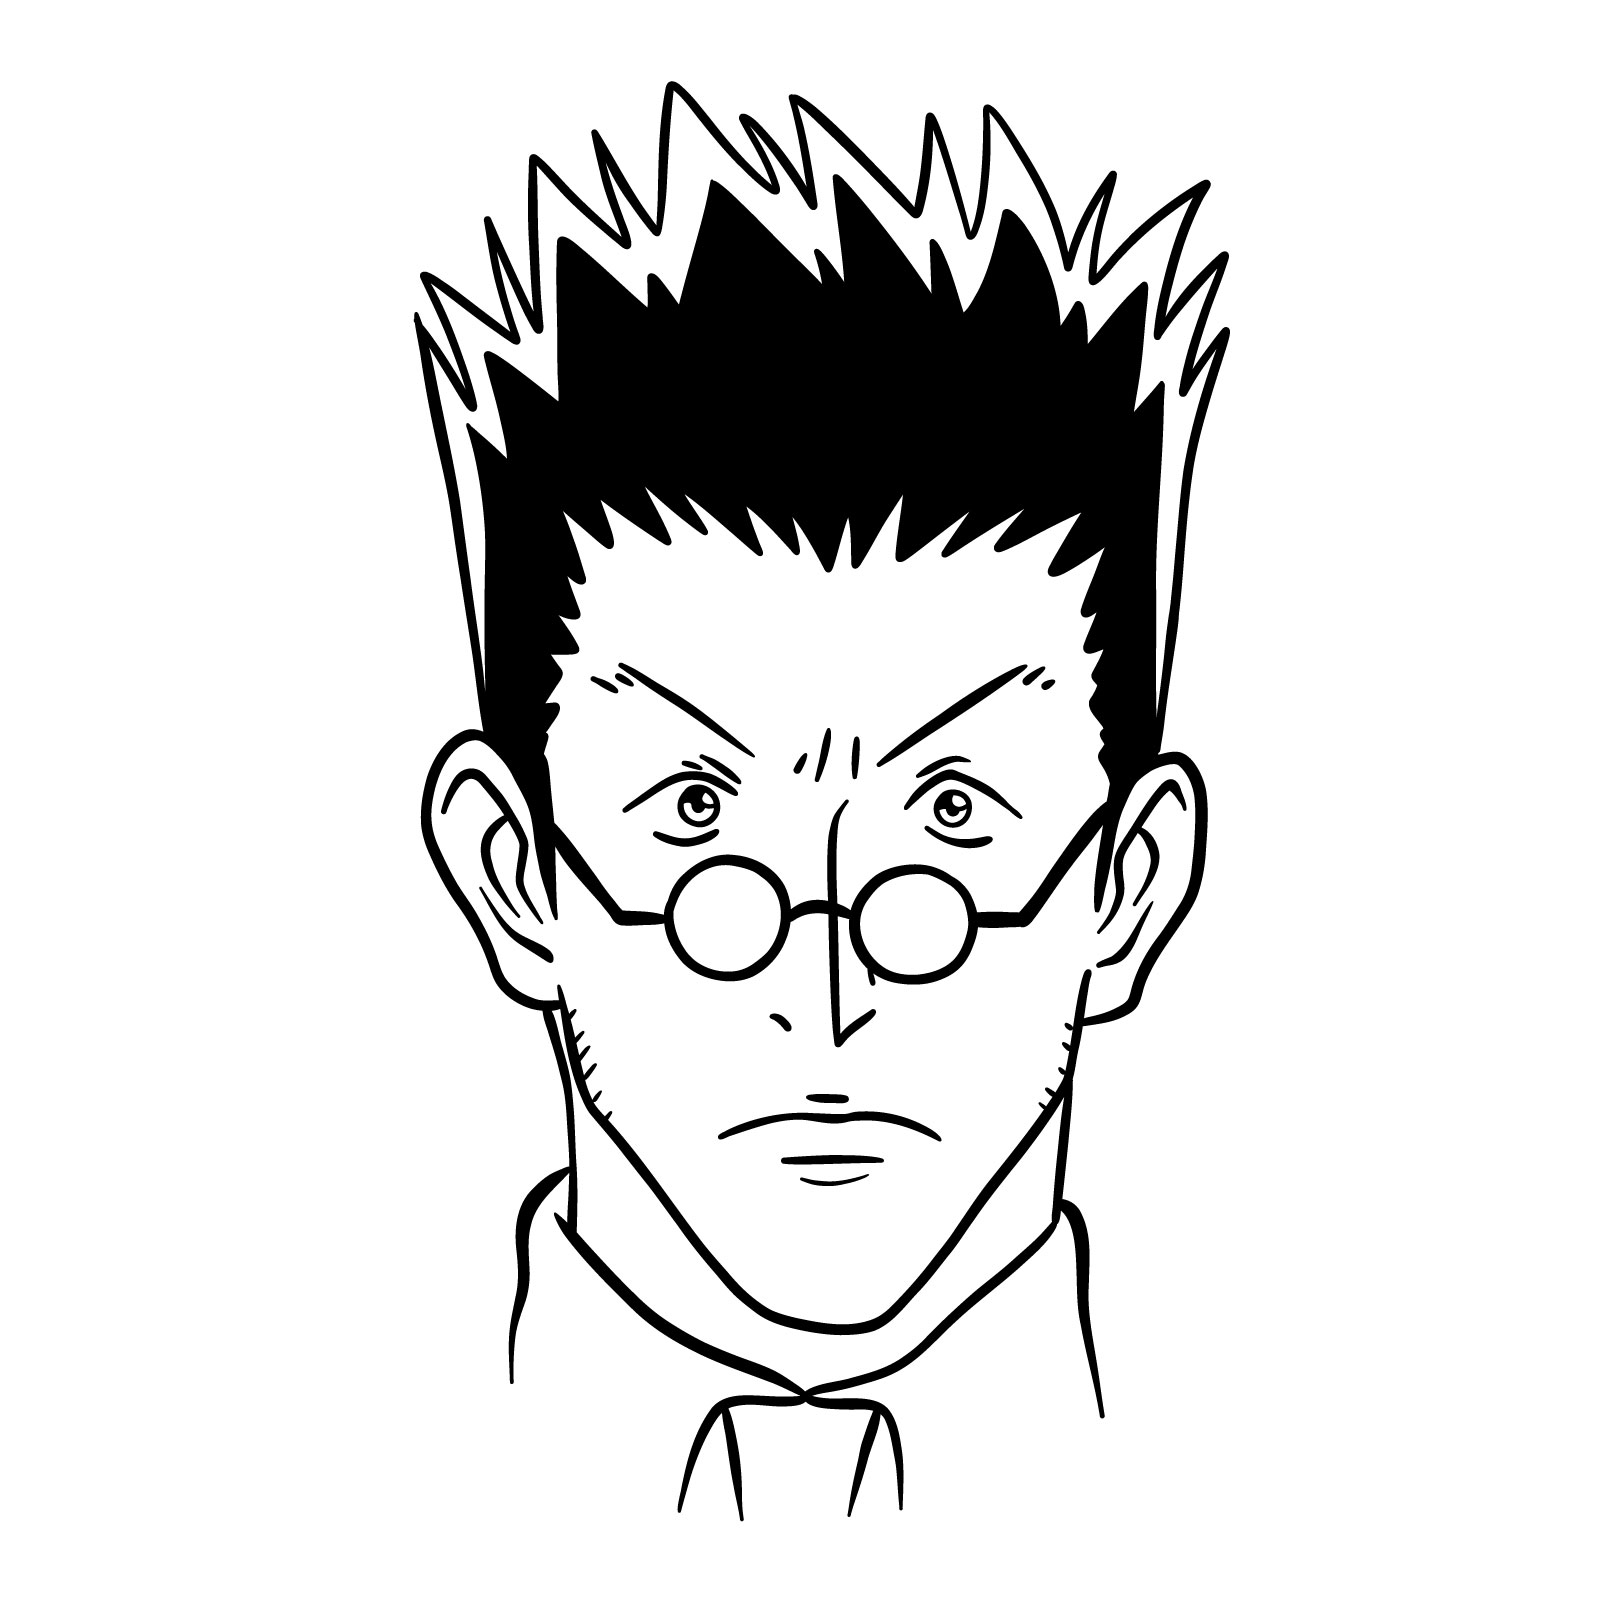 How to draw Leorio's face - Hunter x Hunter - final step